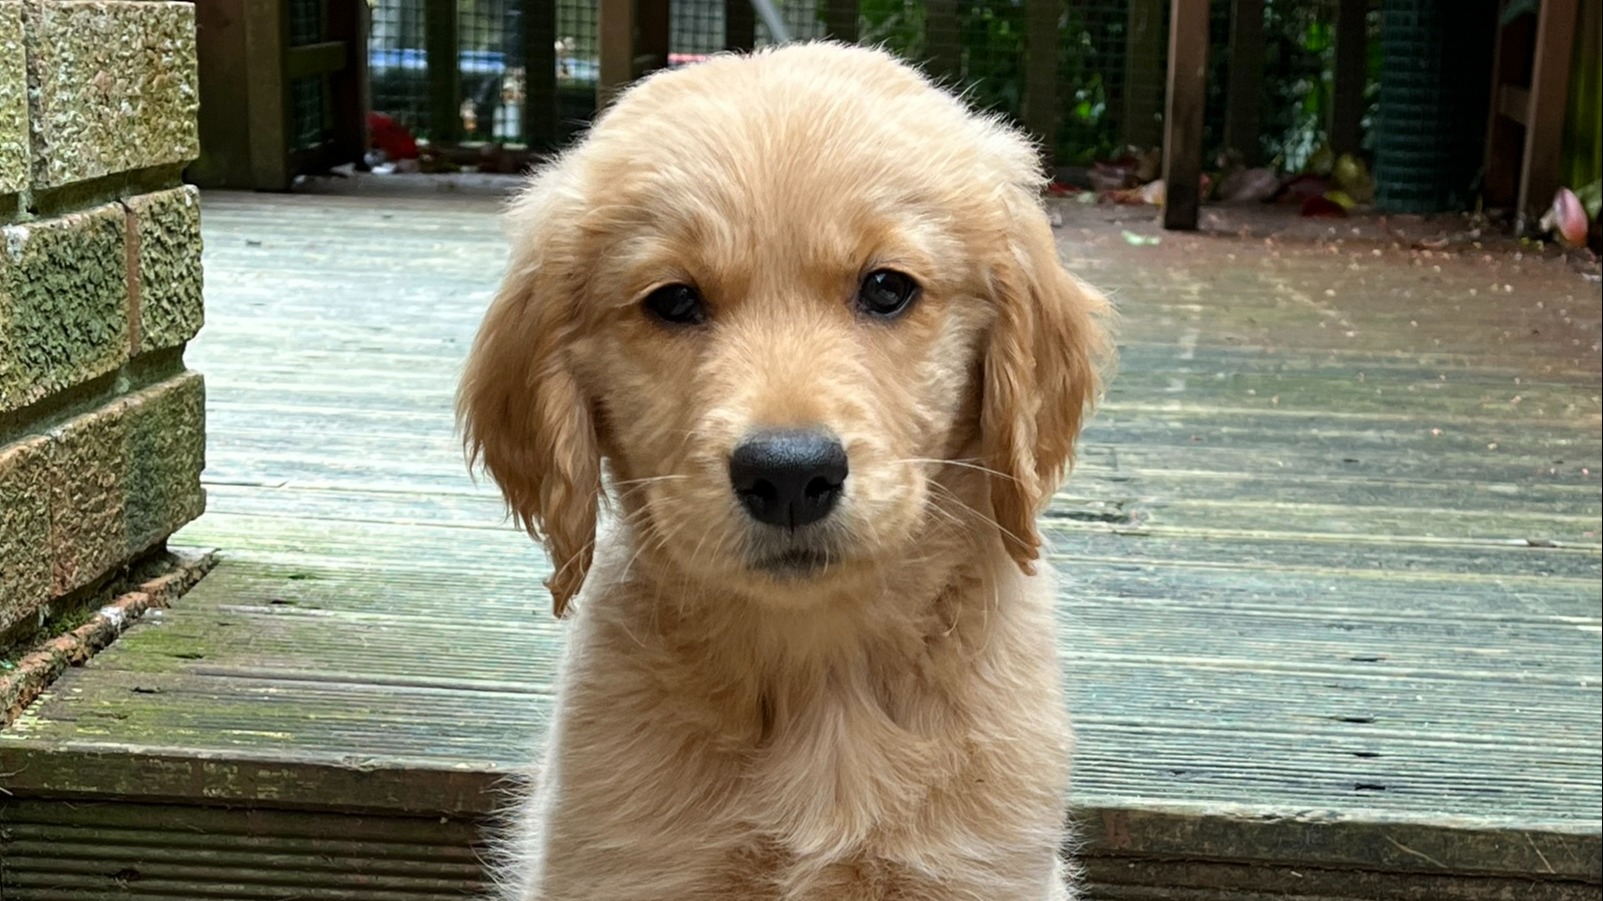 A  golden retriever puppy sits in front of a wooden decking. His ears are slightly damp.